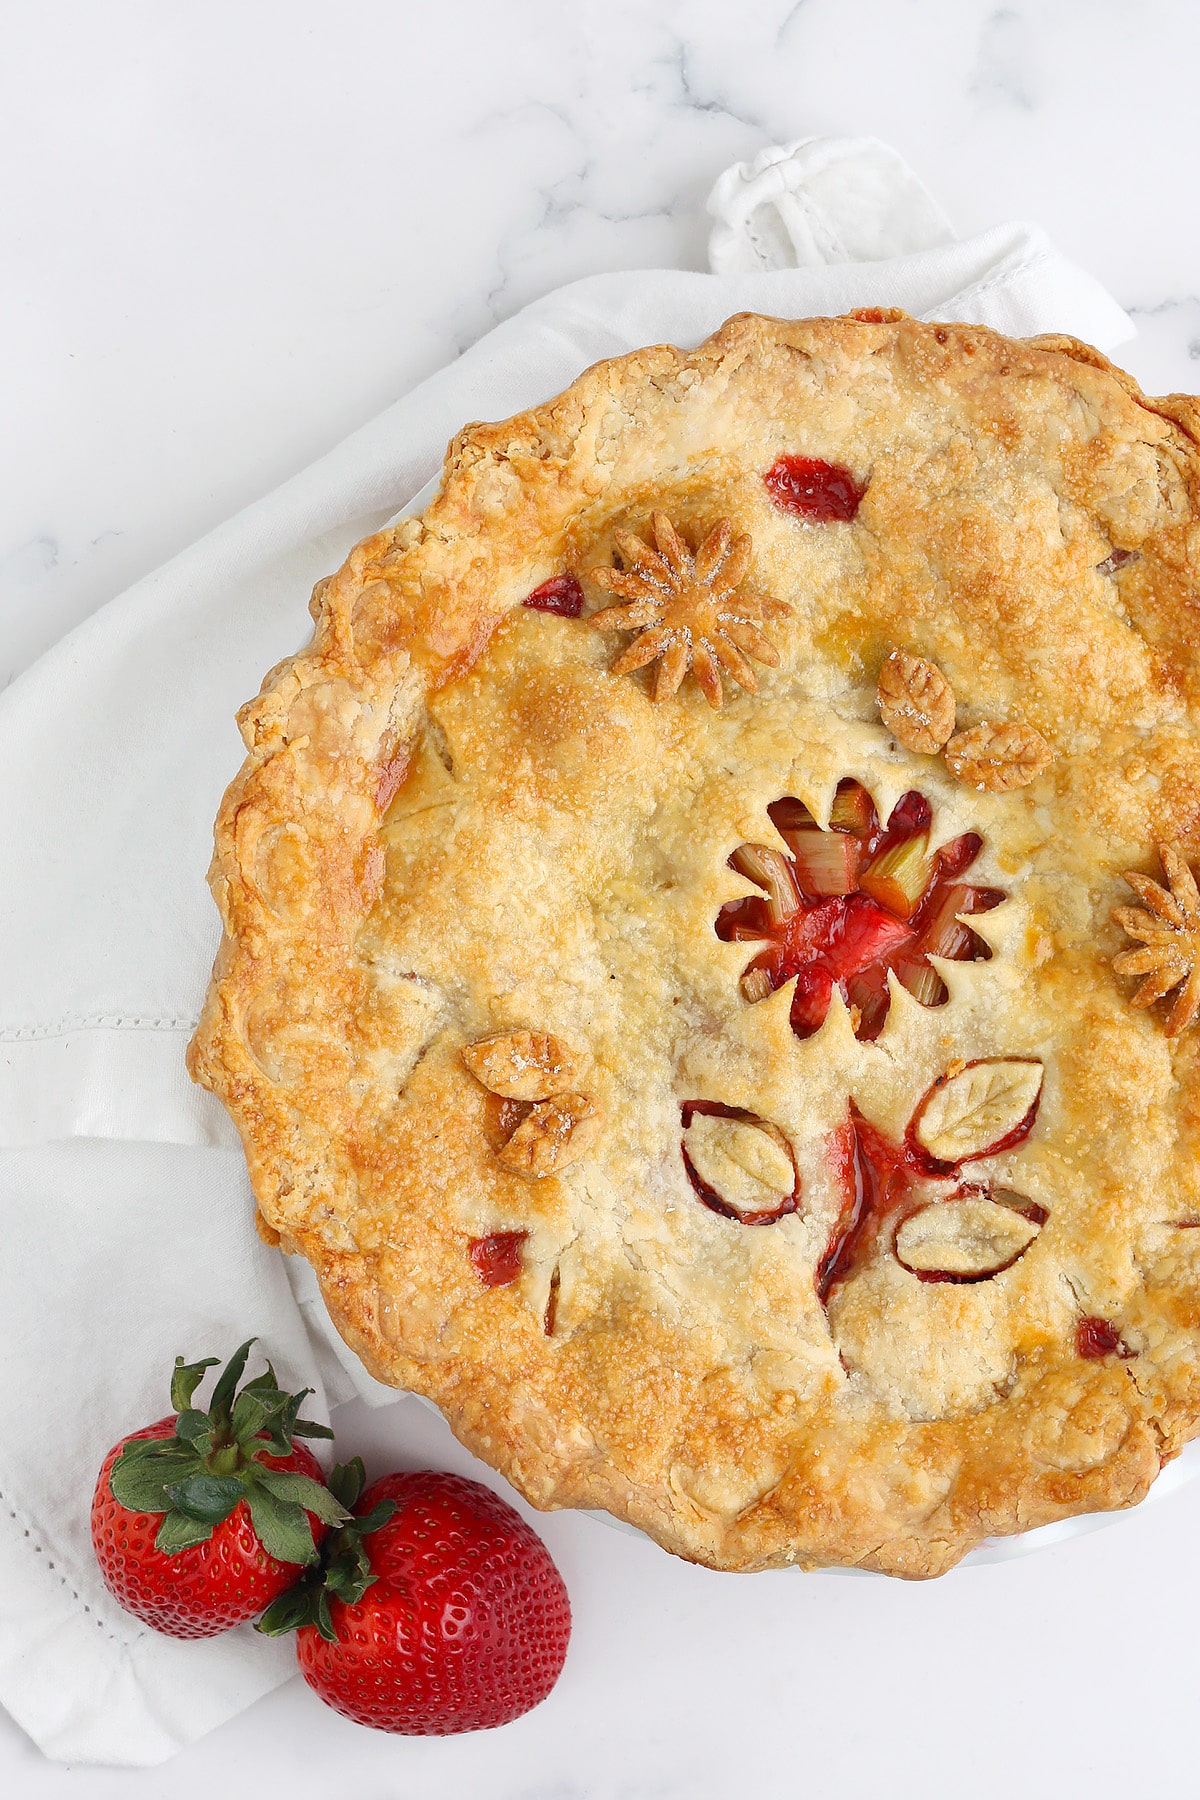 An overhead shot of strawberry rhubarb pie with a flower cutout design.